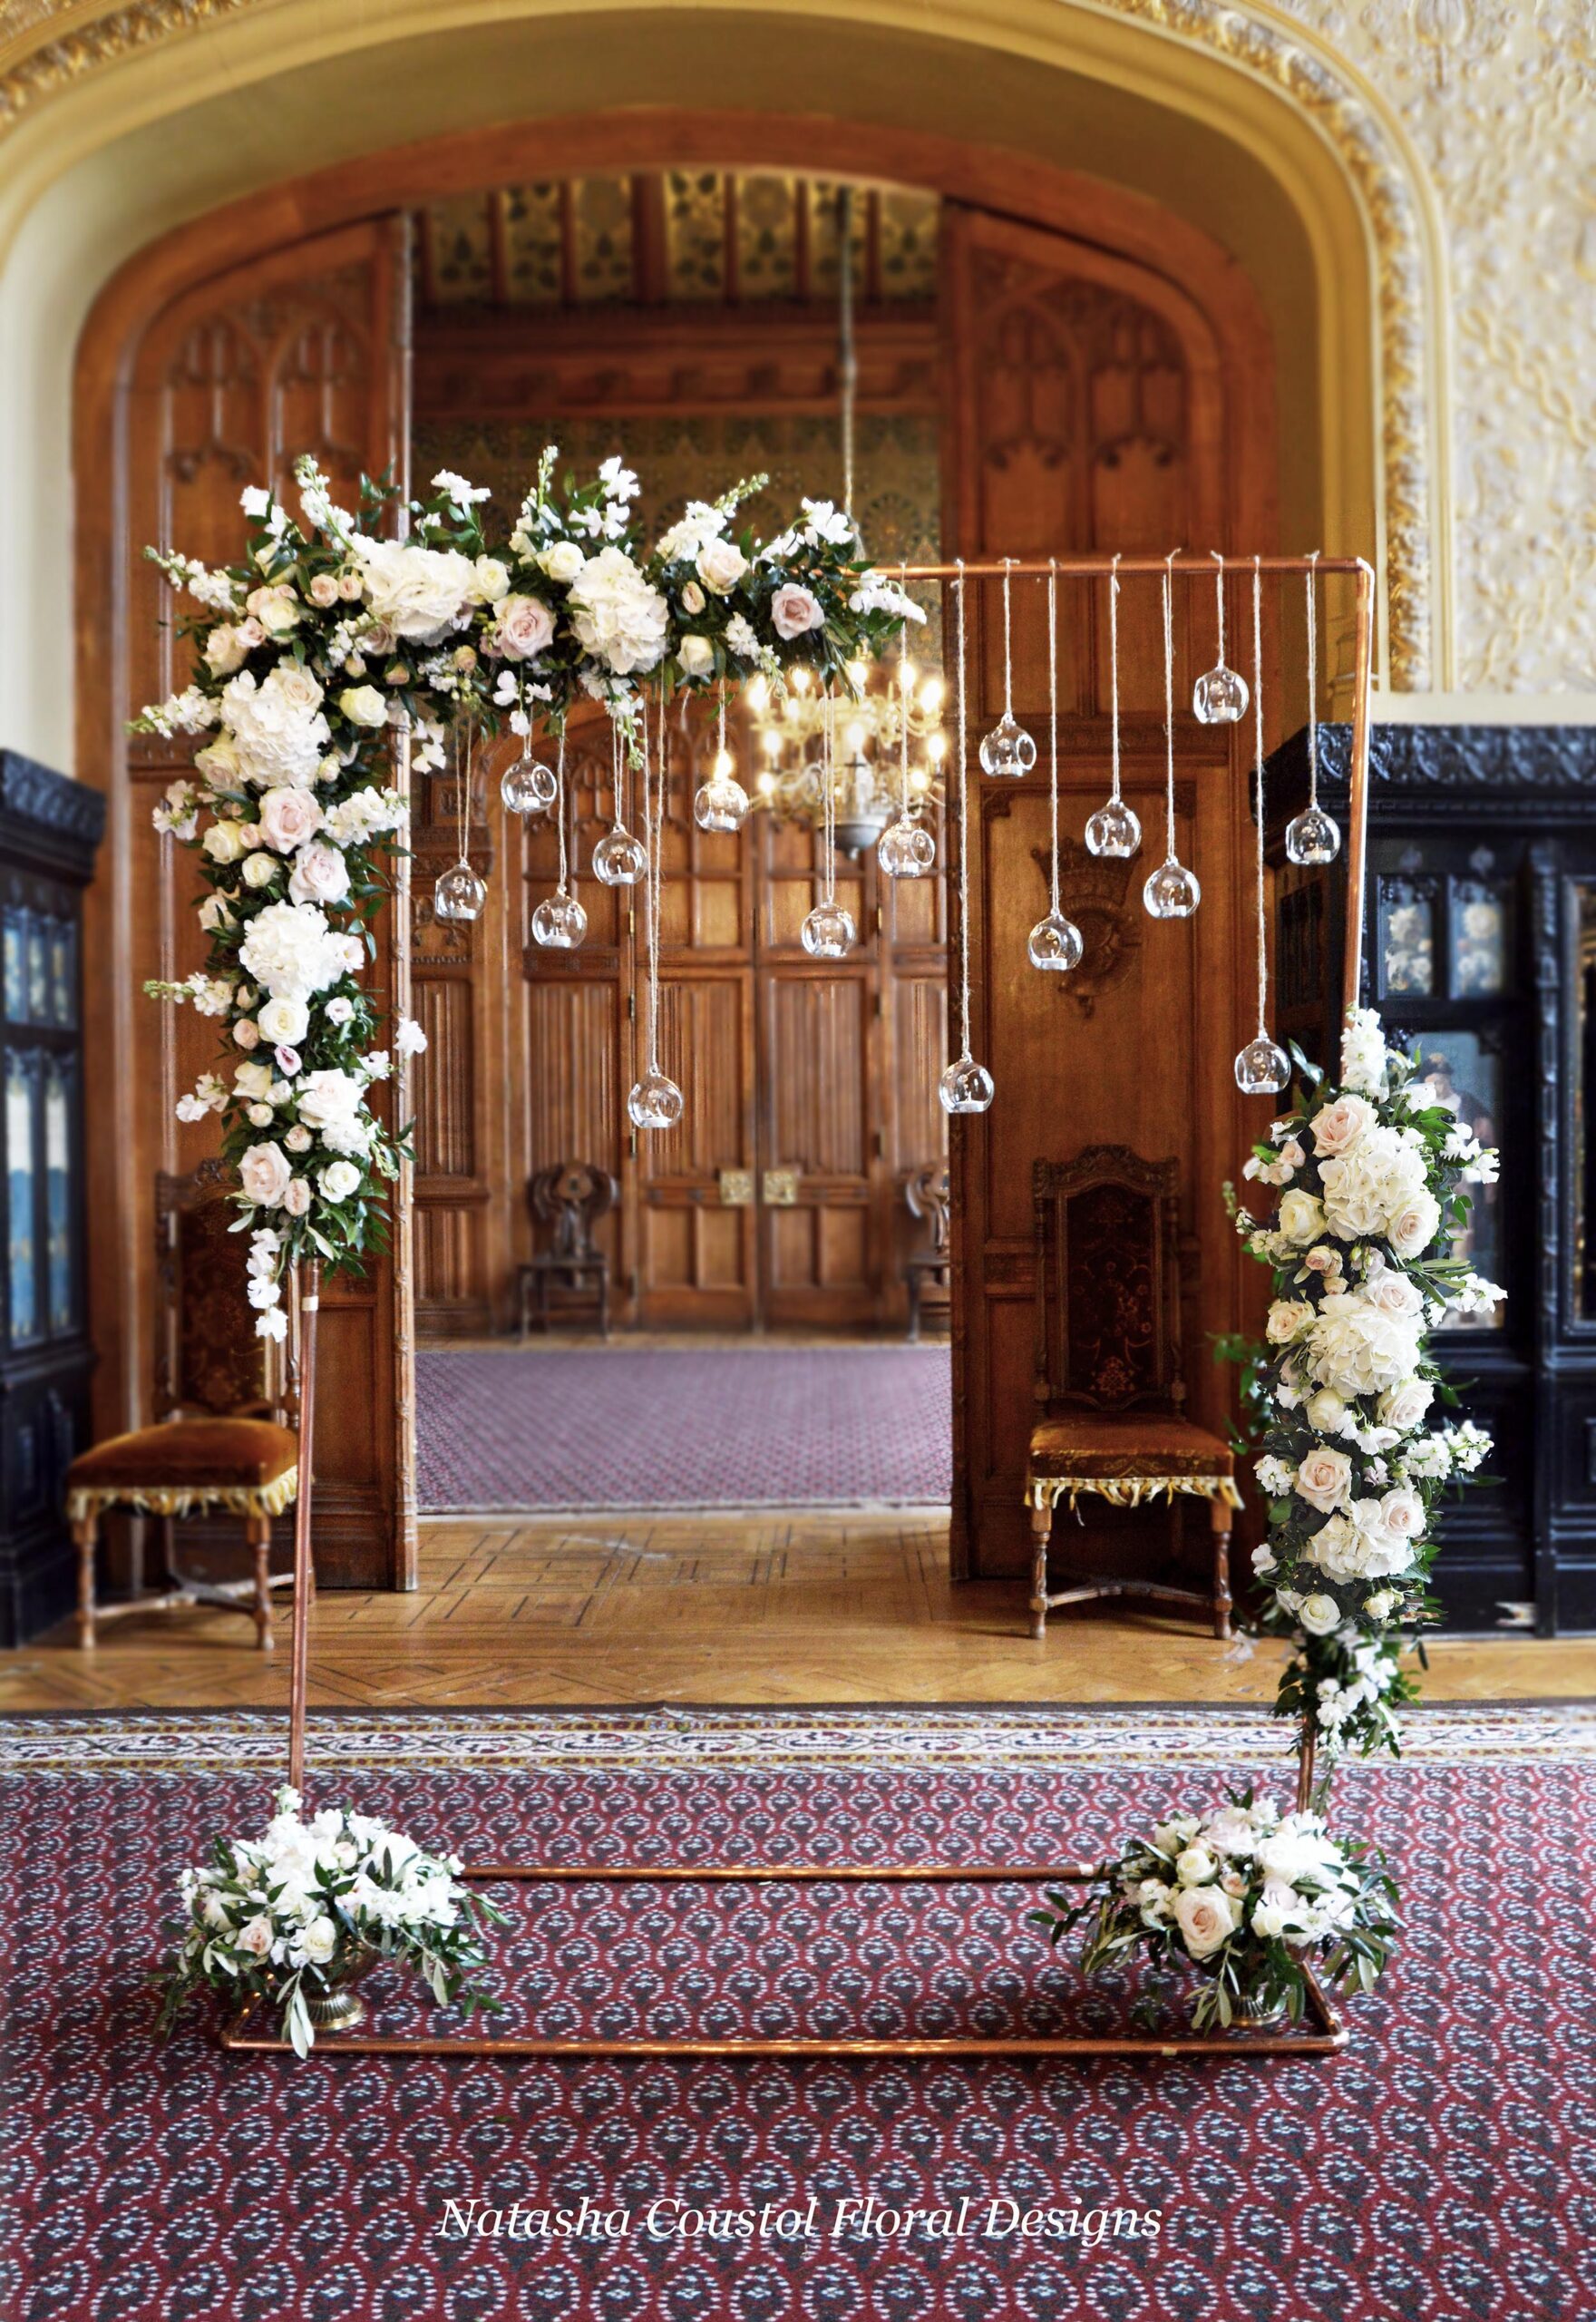 carlton-towers-copper-arch-blush-pink-white-flowers-hanging-candles-copy-3-scaled Grid No Space 5 Columns